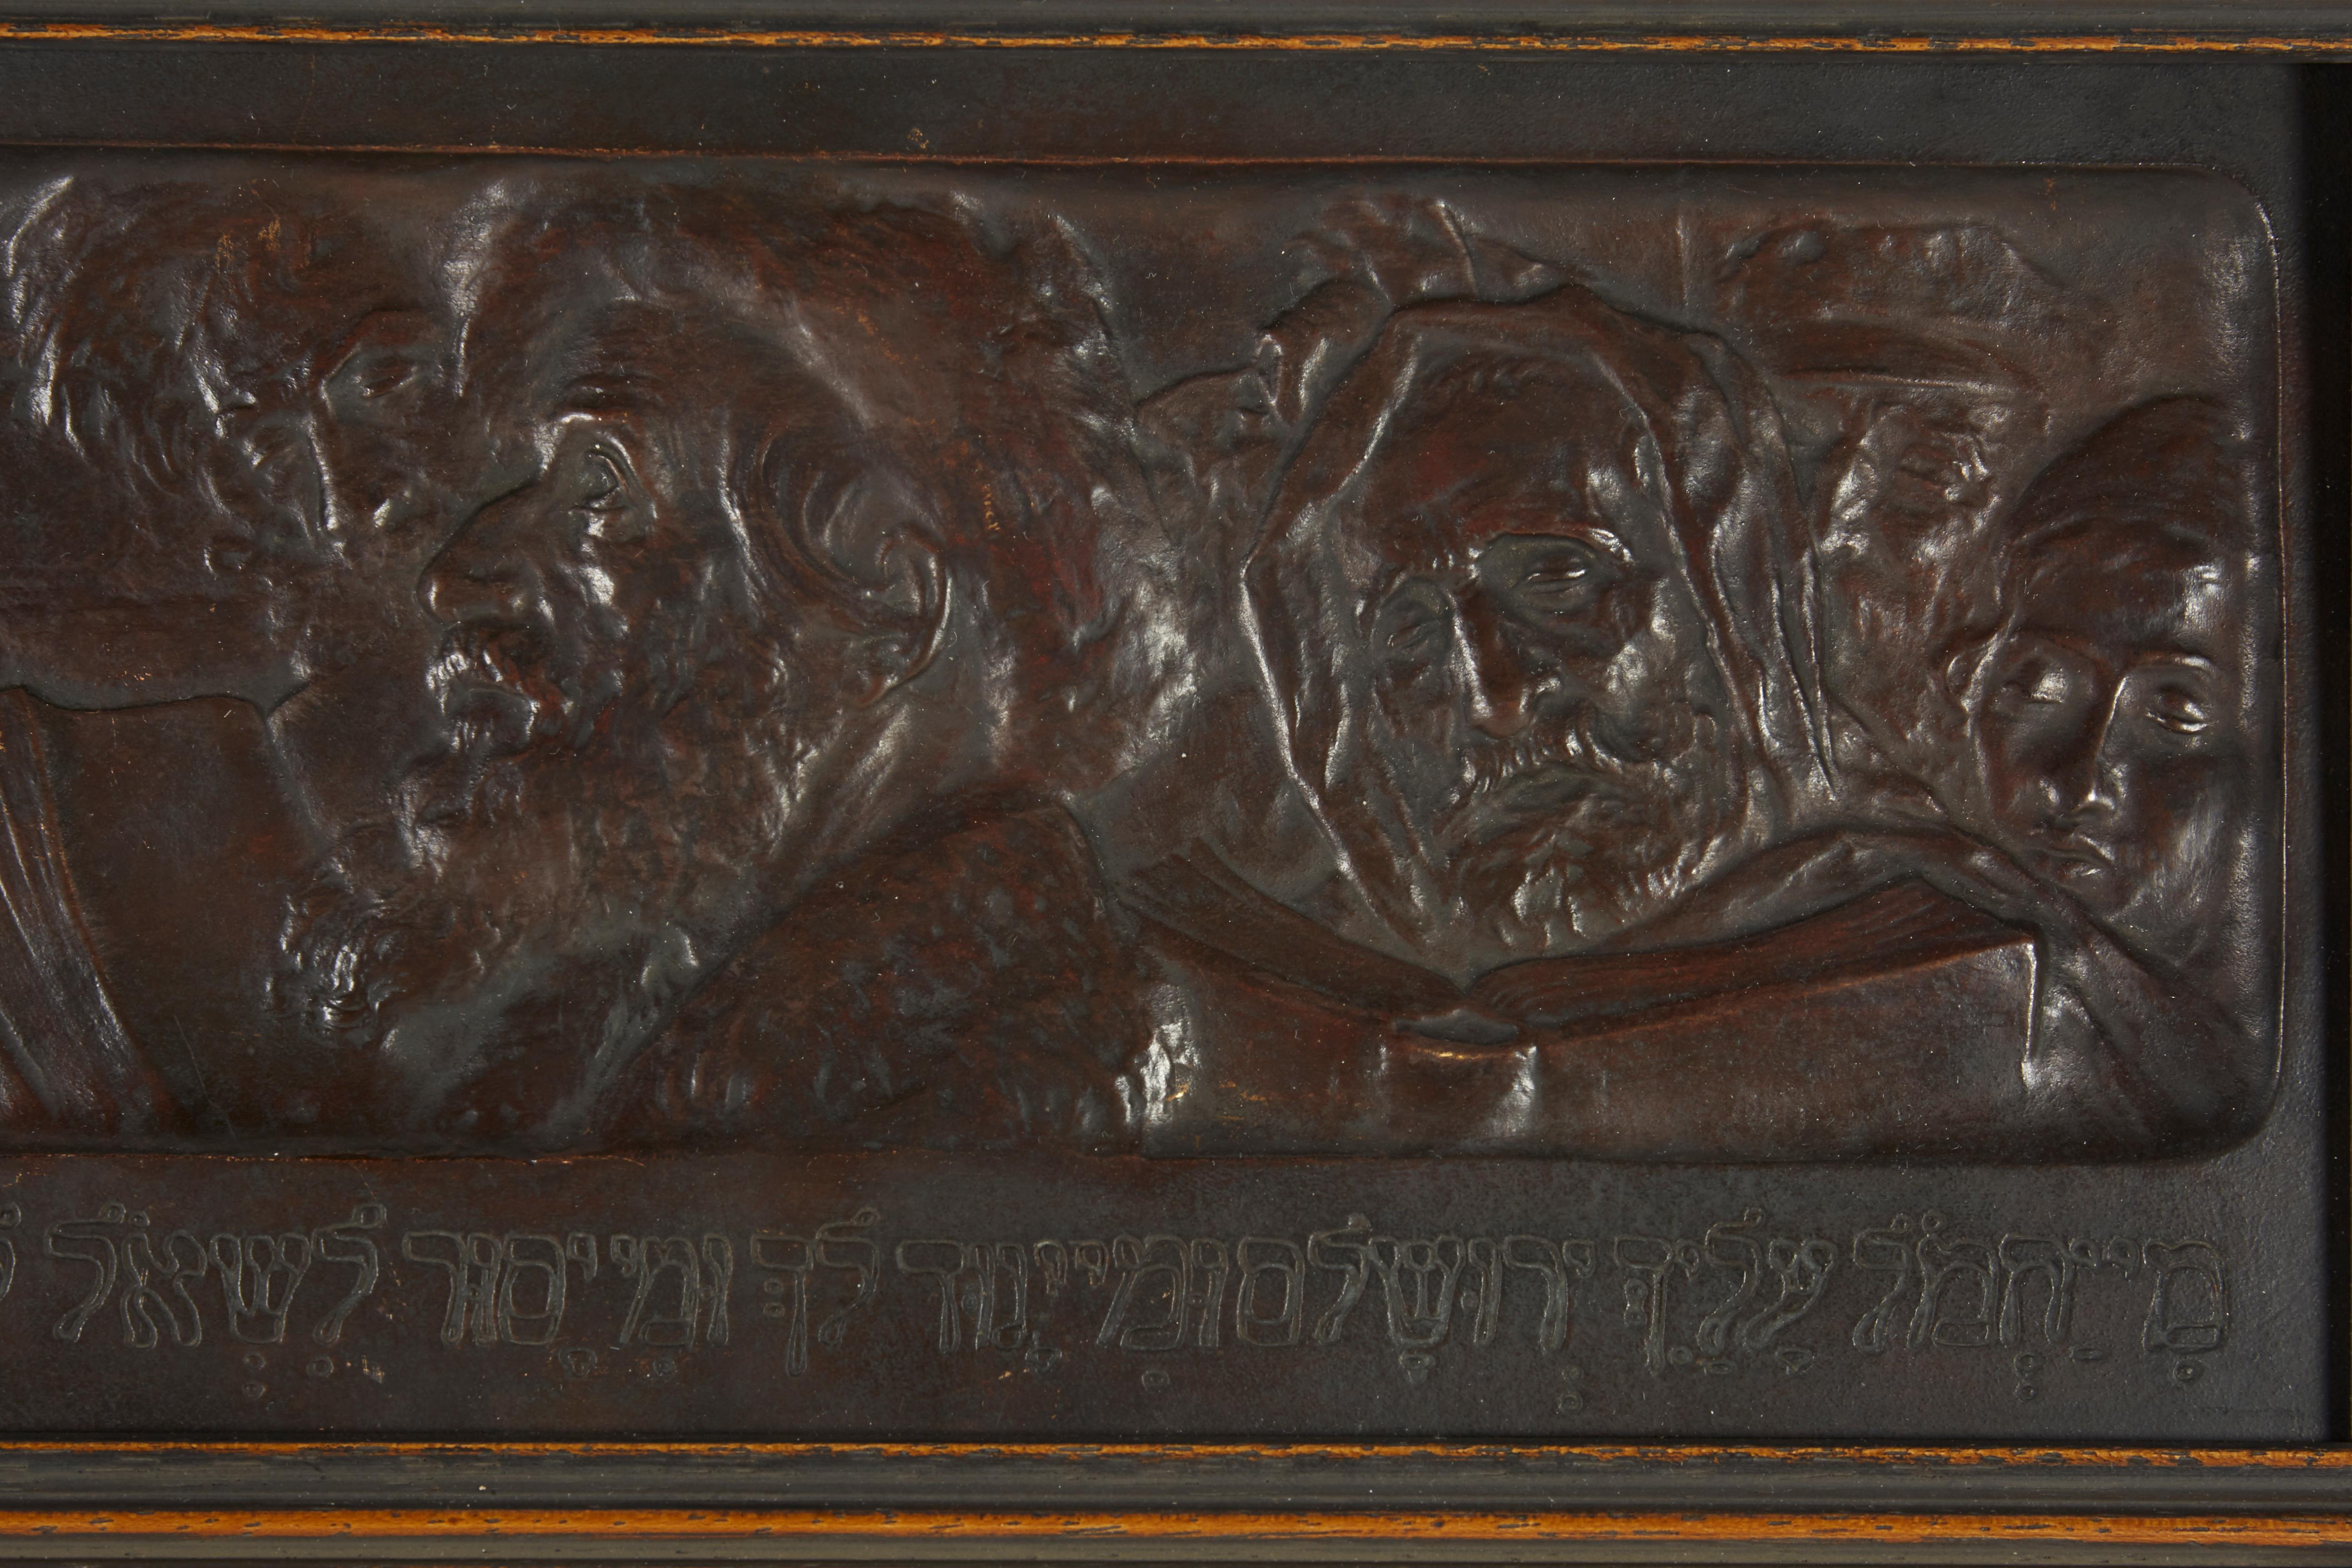 Boris Schatz Bronze Plaque In high relief, expertly cast bronze. Depicting bearded men on the floor of the Synagogue reading kinnot (sad poems / elegies), on the fast day of Tisha B’Av. This scene is titled in Hebrew: “Who will have pity on you, O